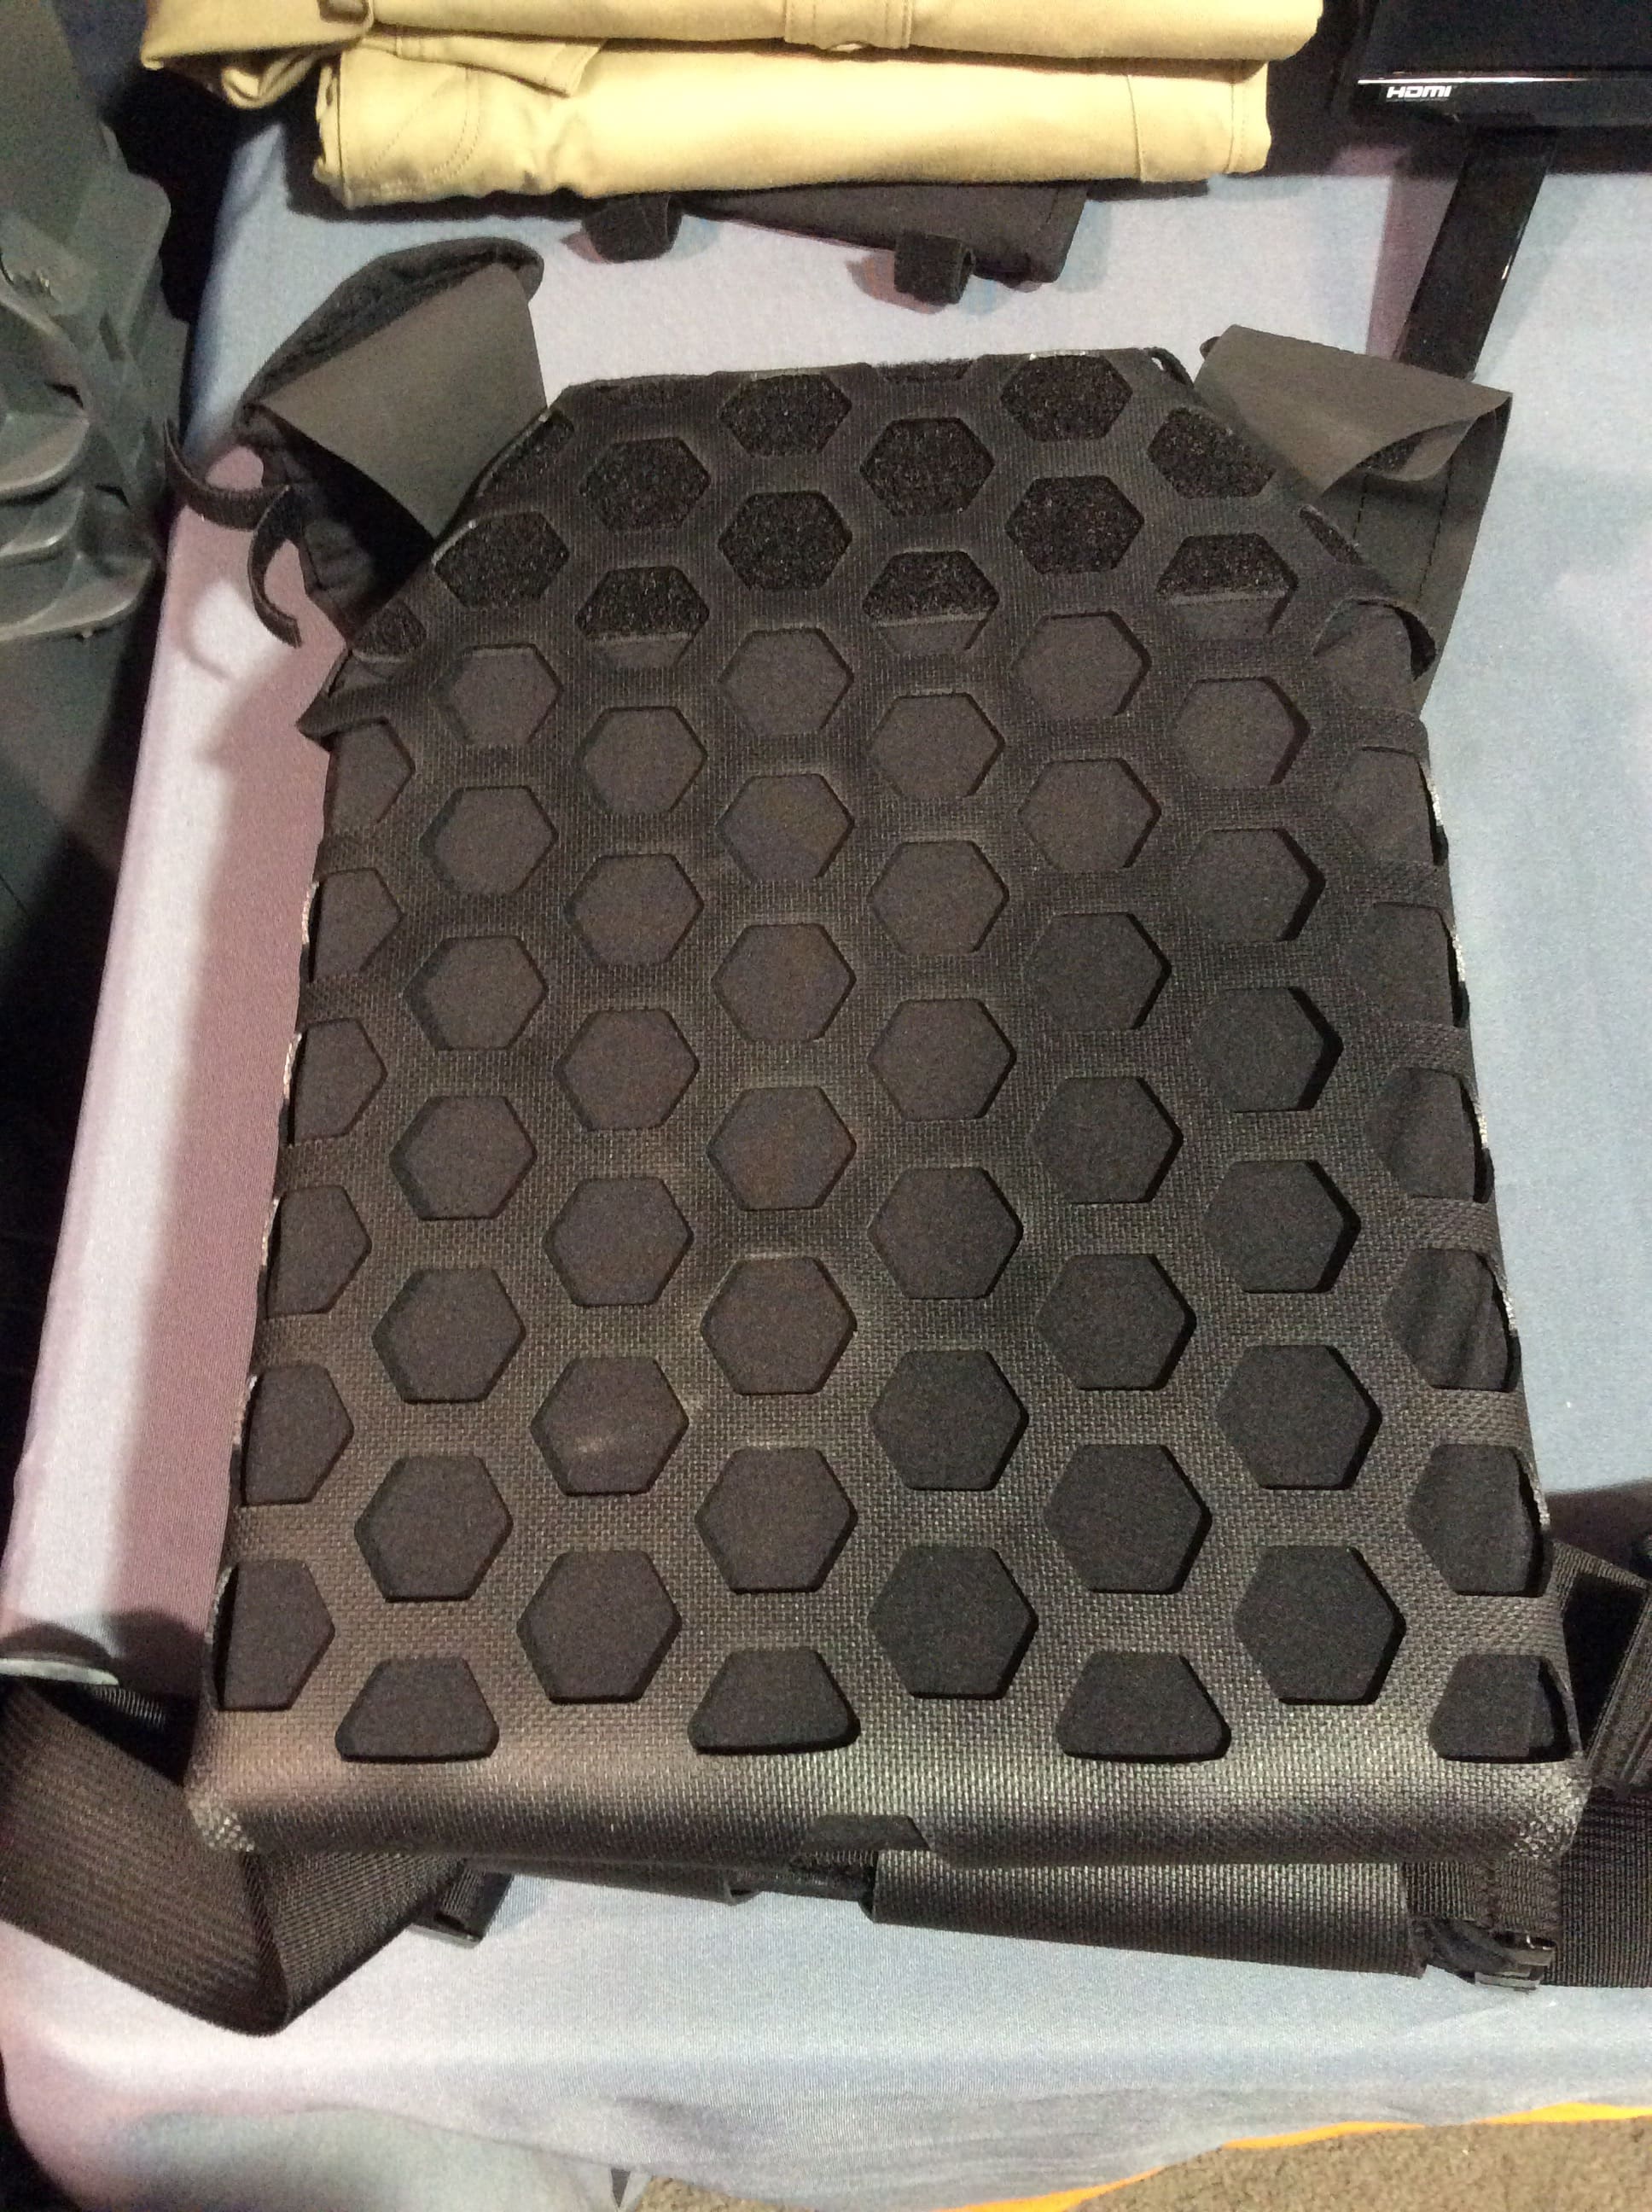 MDM – 5.11 Tactical's HEXGRID - Soldier Systems Daily